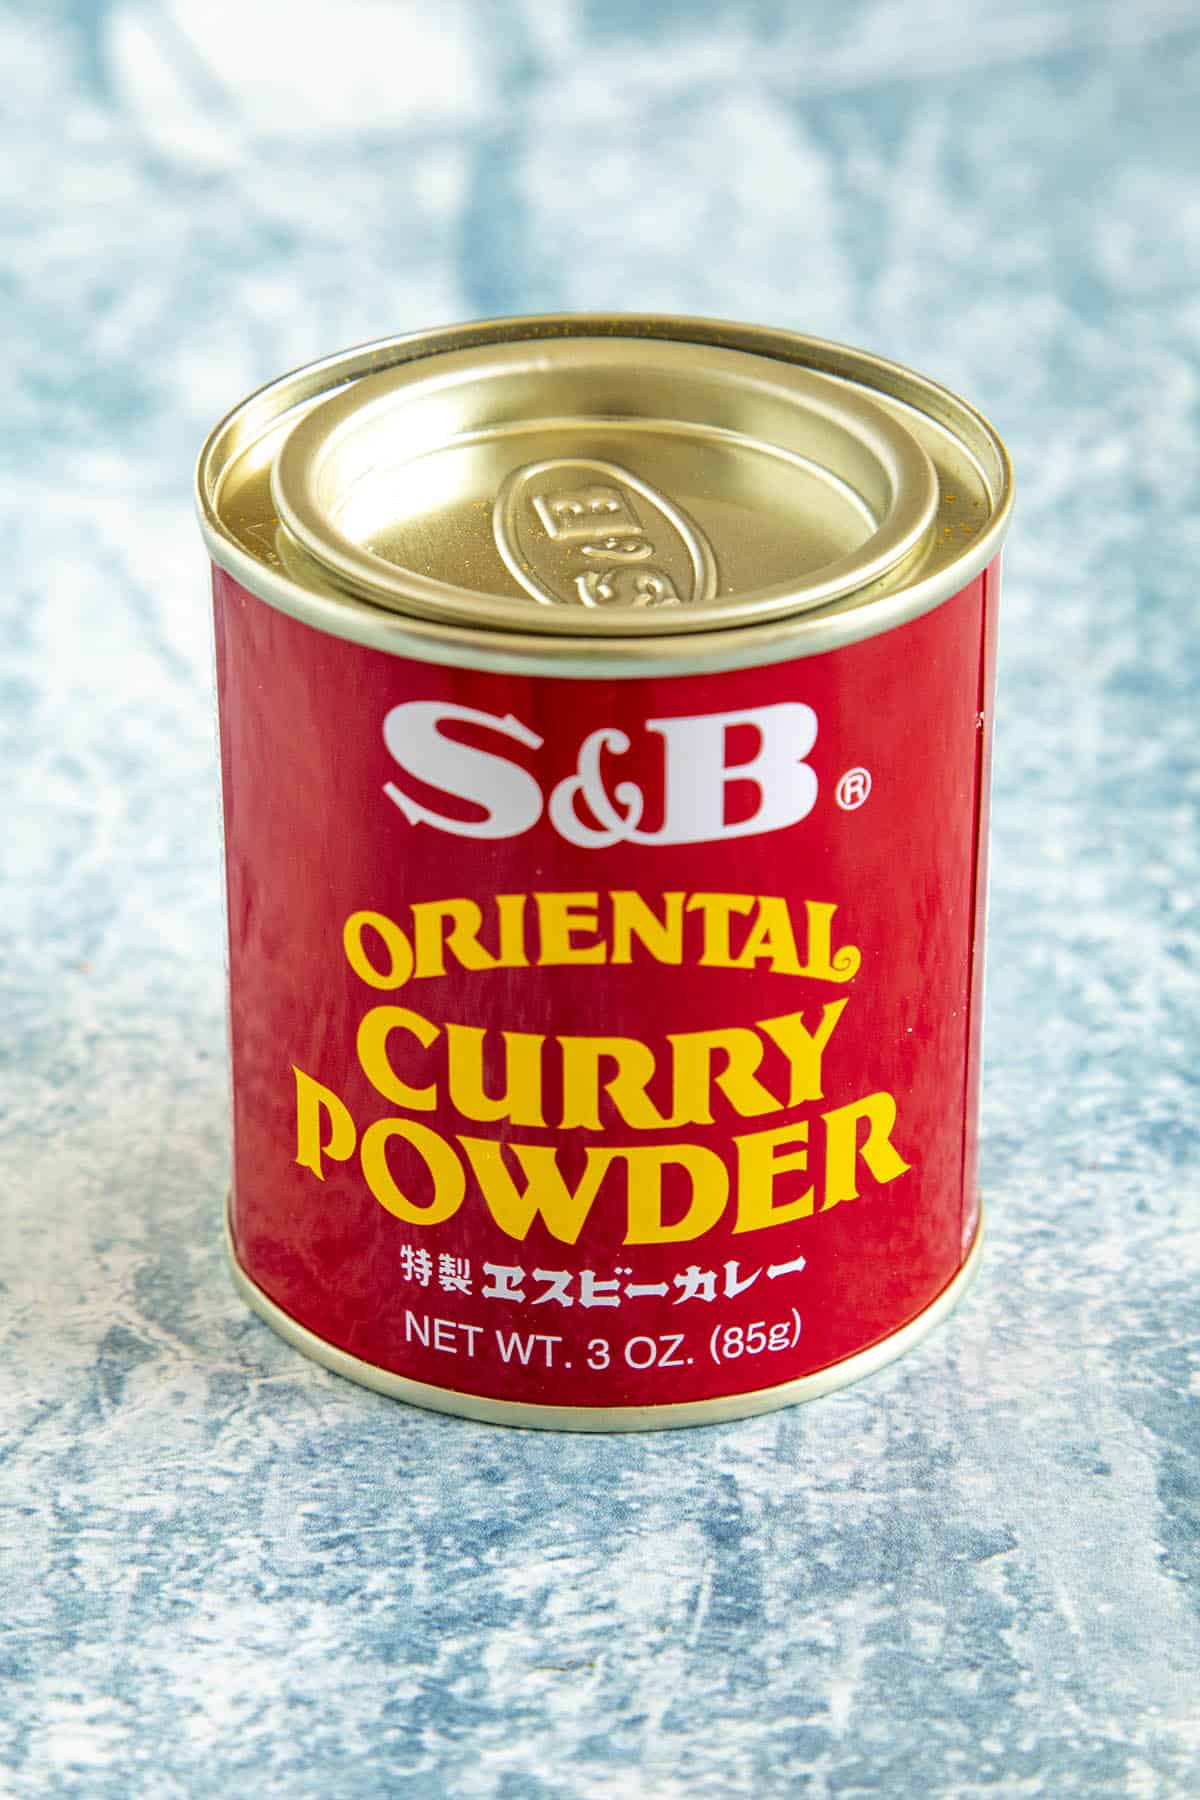 S&B Oriental Curry Powder for making Japanese Curry